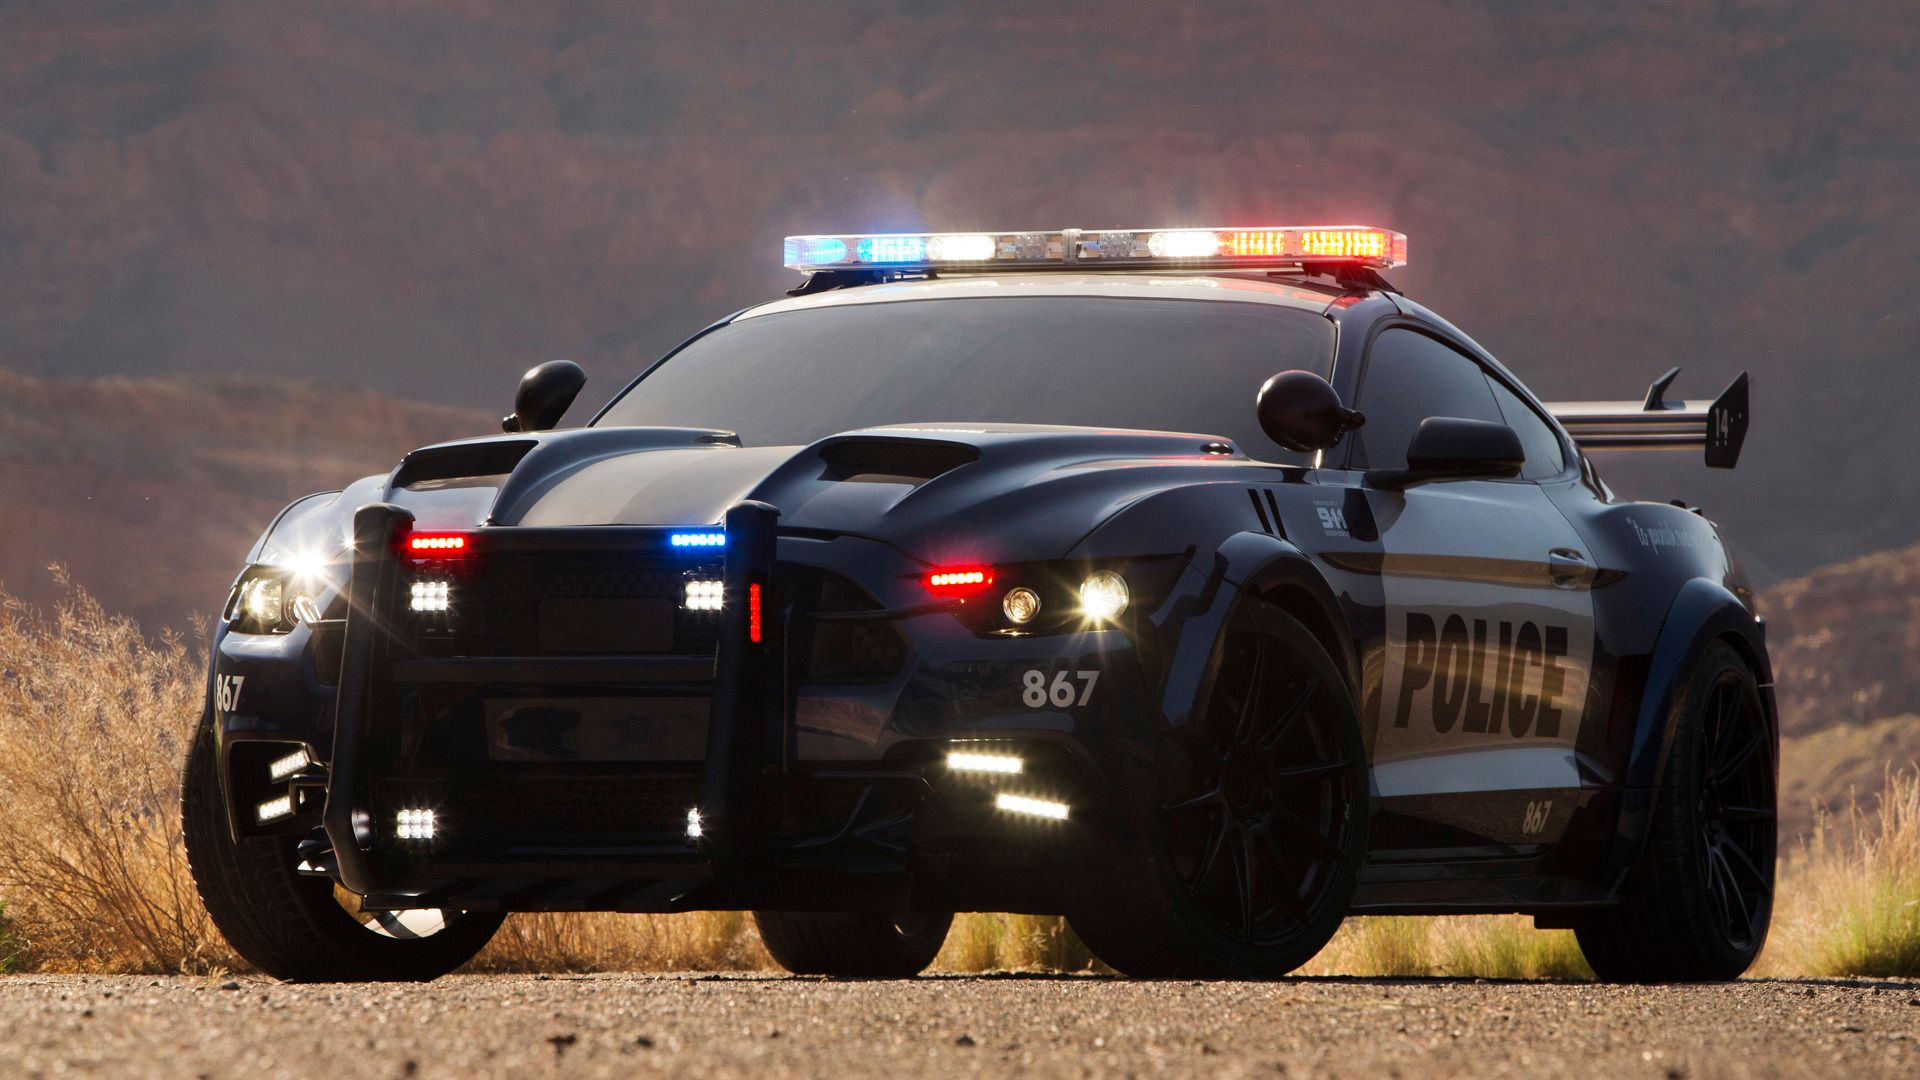 Transformers 5: The Last Knight - Barricade (Ford Mustang)